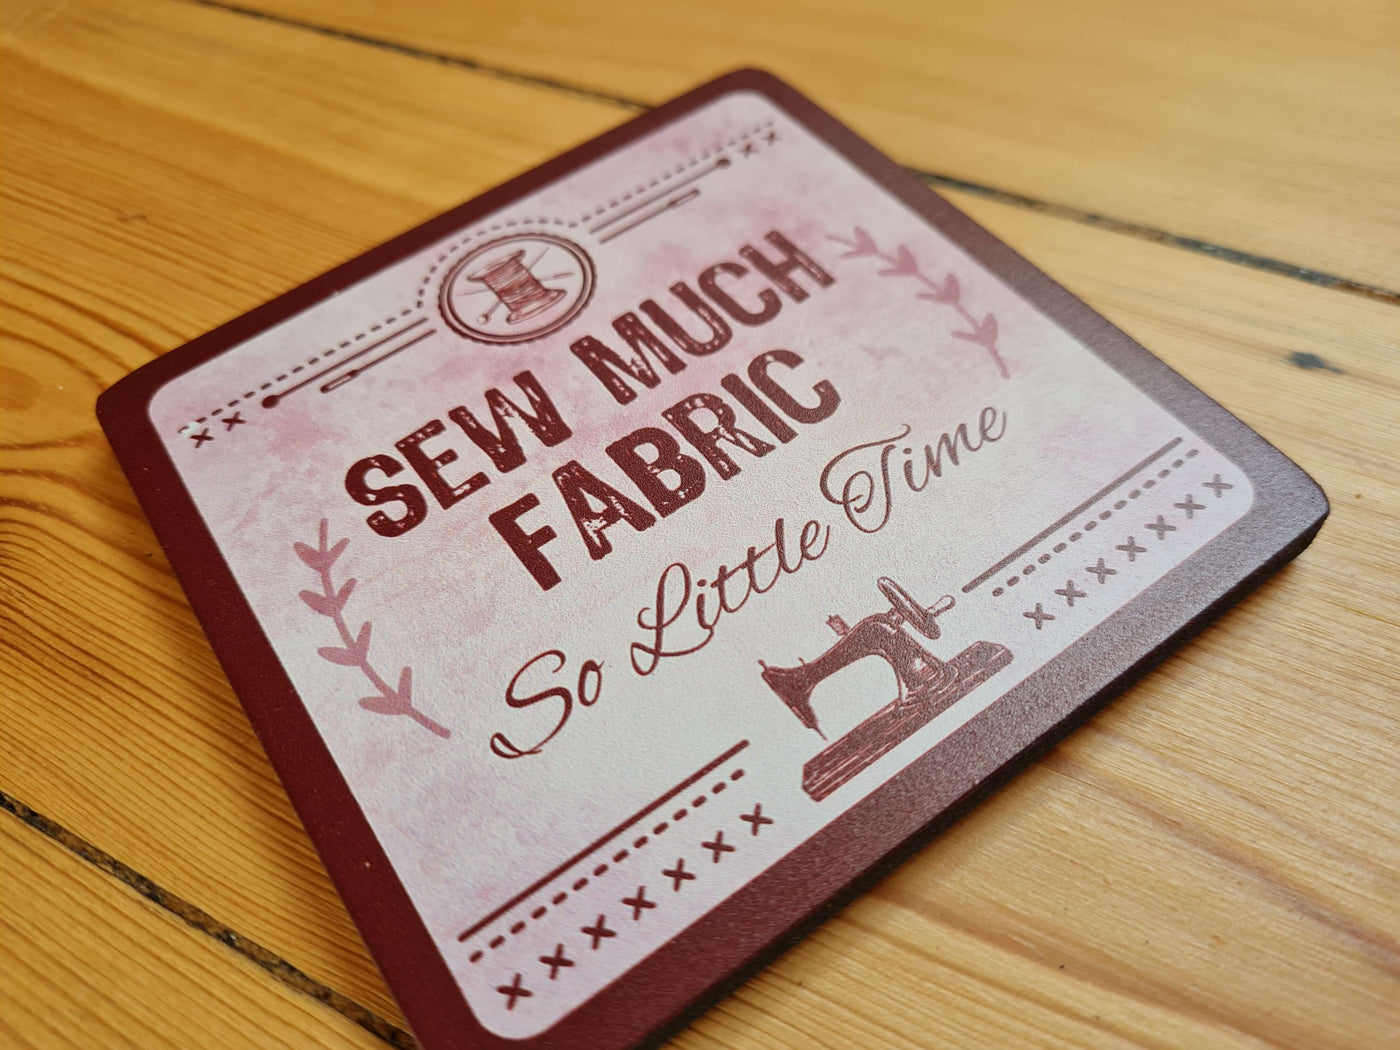 Sewing Crafting coaster. Great sewing gift or stocking filler.